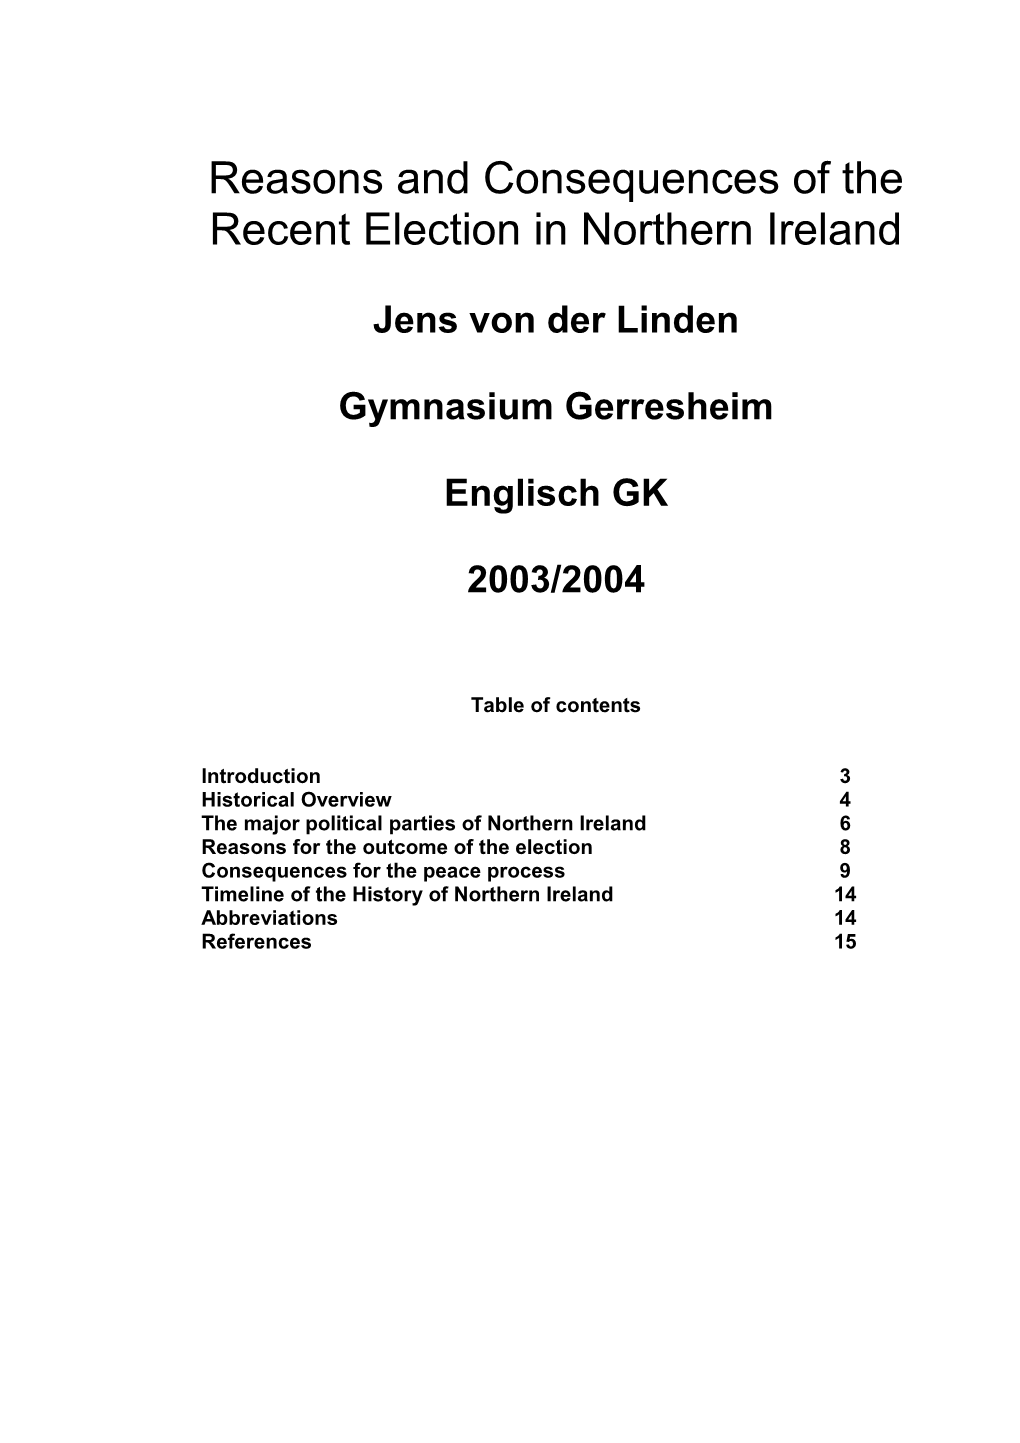 Reasons and Consequences of the Recent Election in Northern Ireland